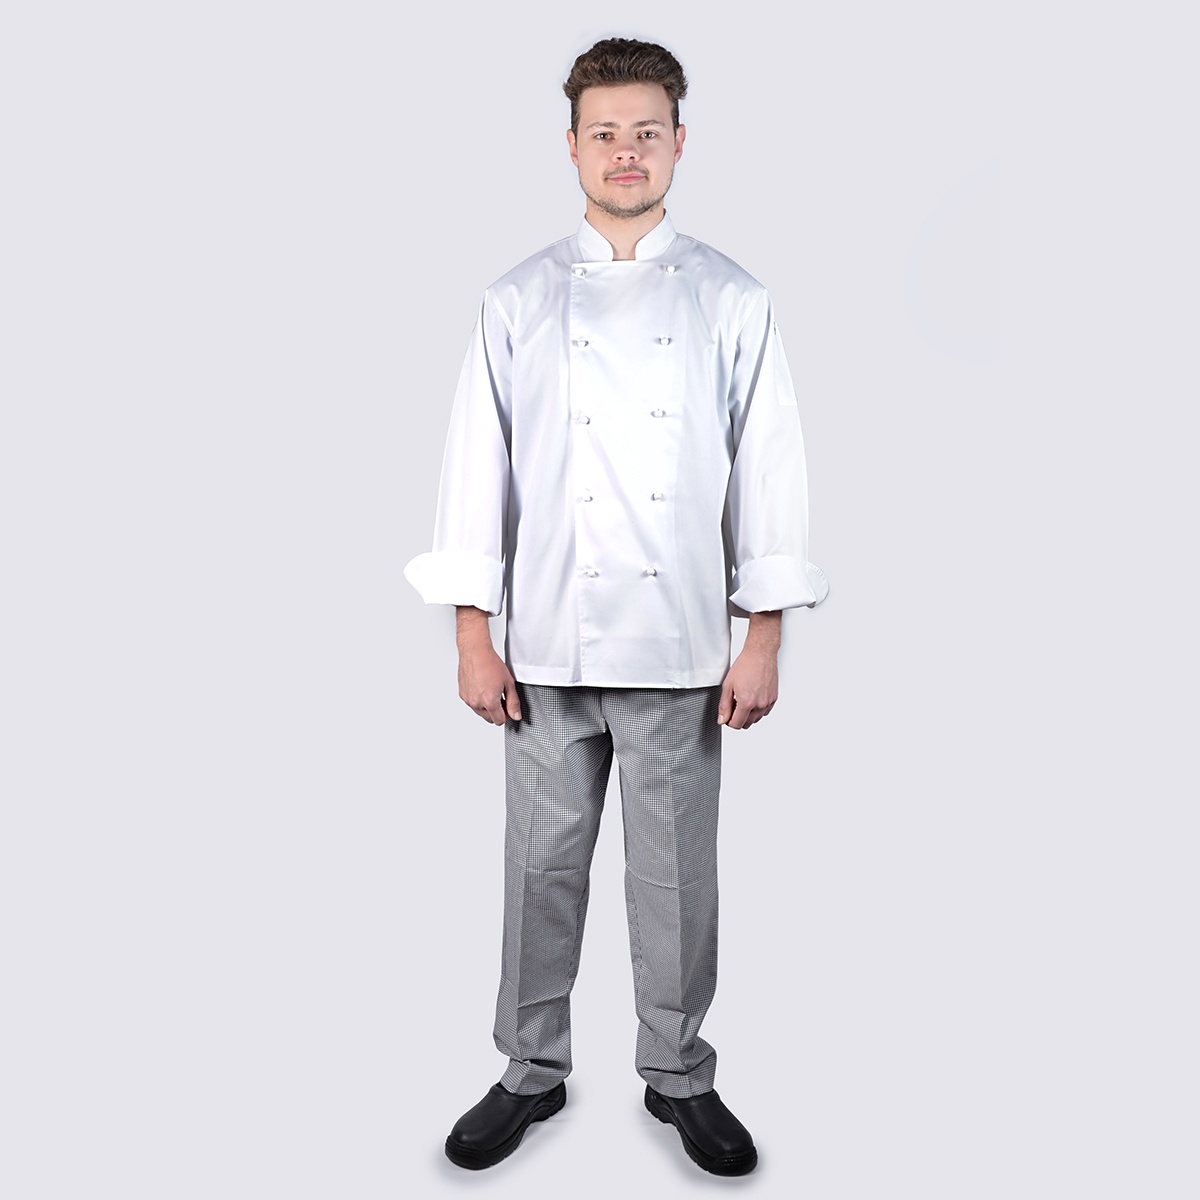 Chef Jacket White Long Sleeve and Checkered Pant